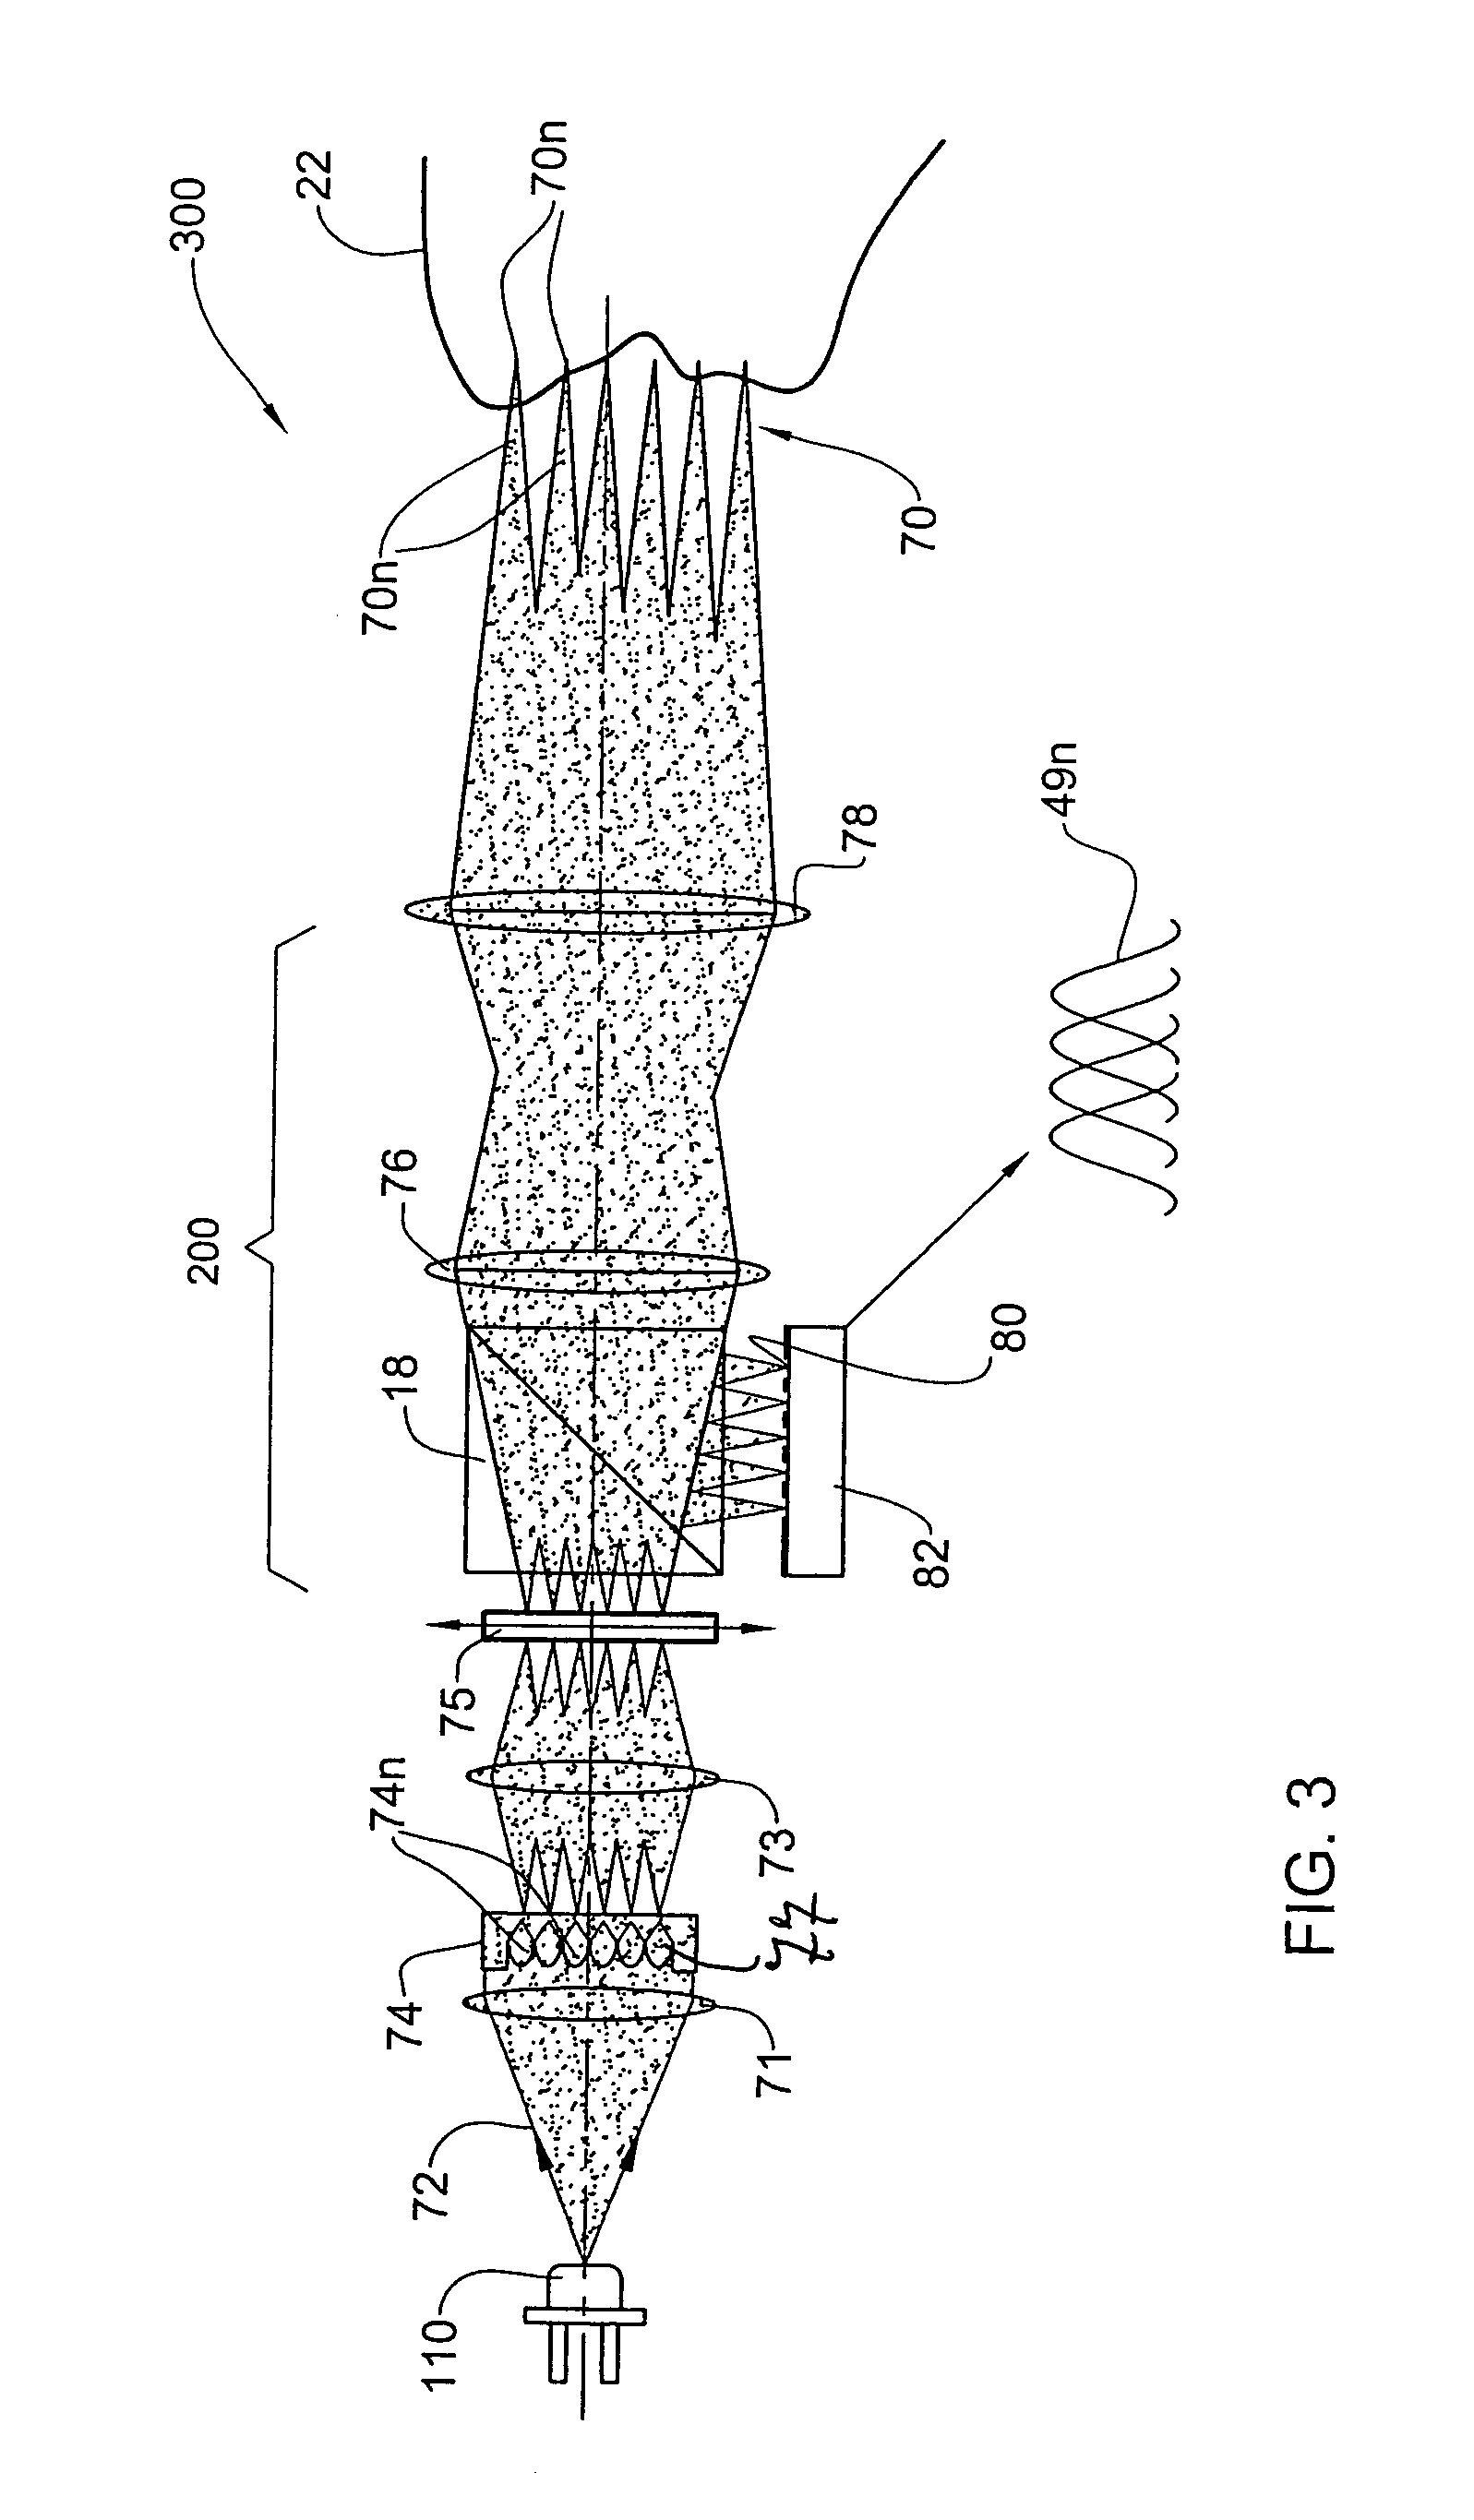 Apparatus and method for providing high intensity non-coherent light and for speckle reduction